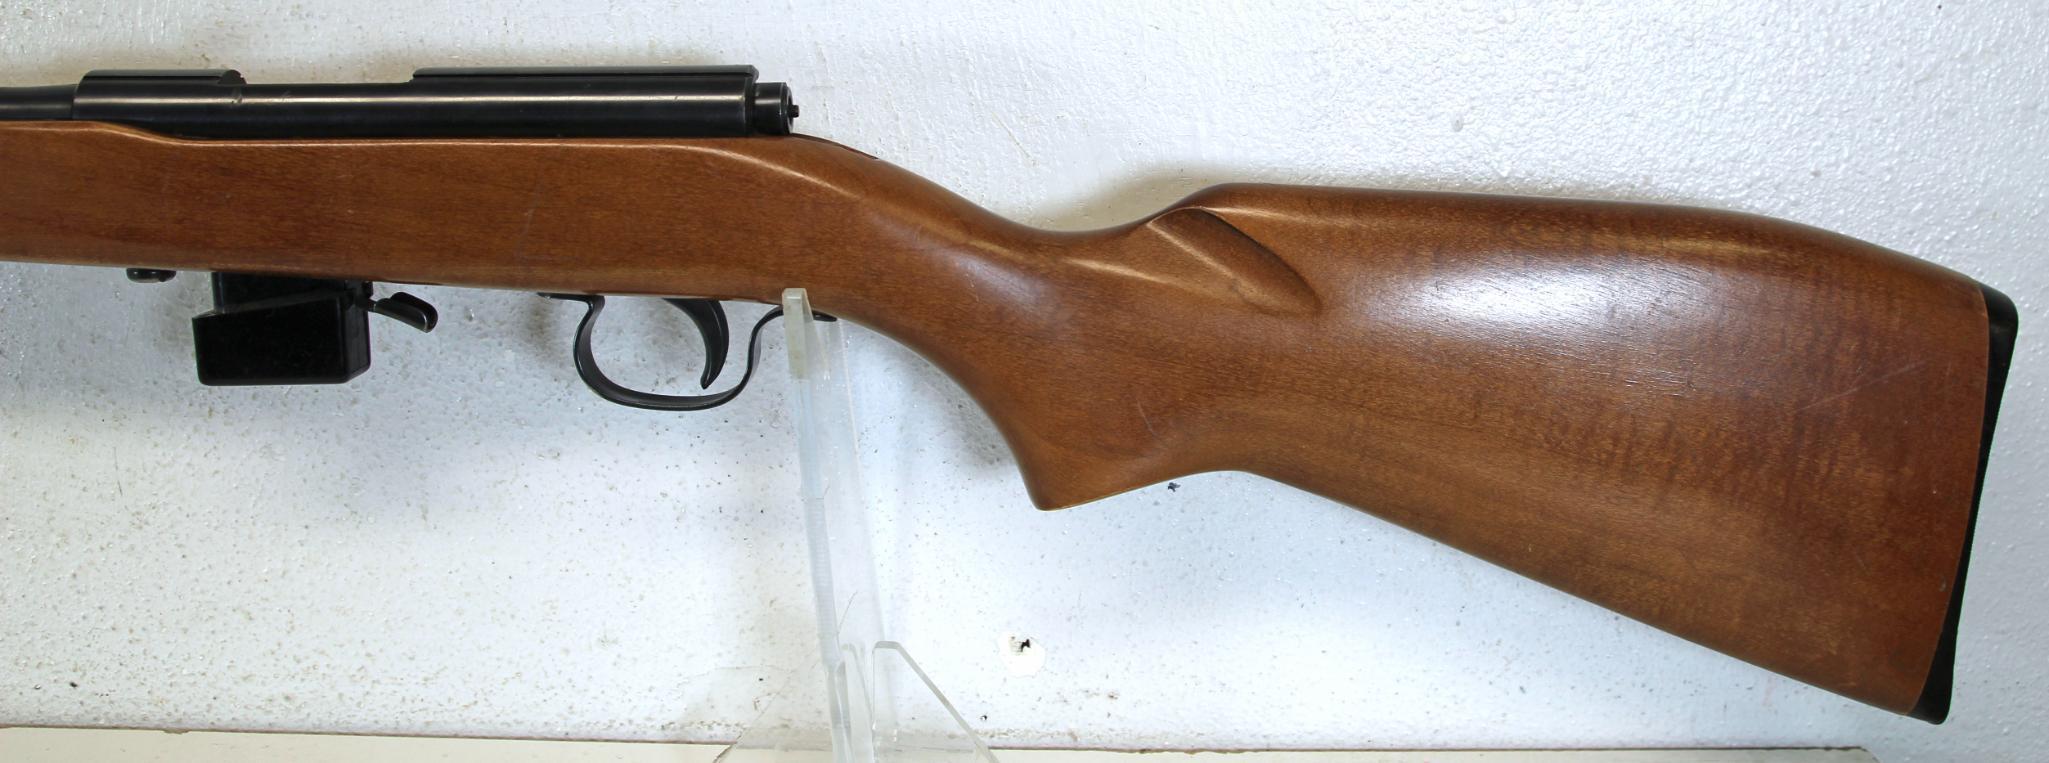 Winchester Model 131 .22 S,L,LR Clip Fed Bolt Action Rifle SN#NSN...